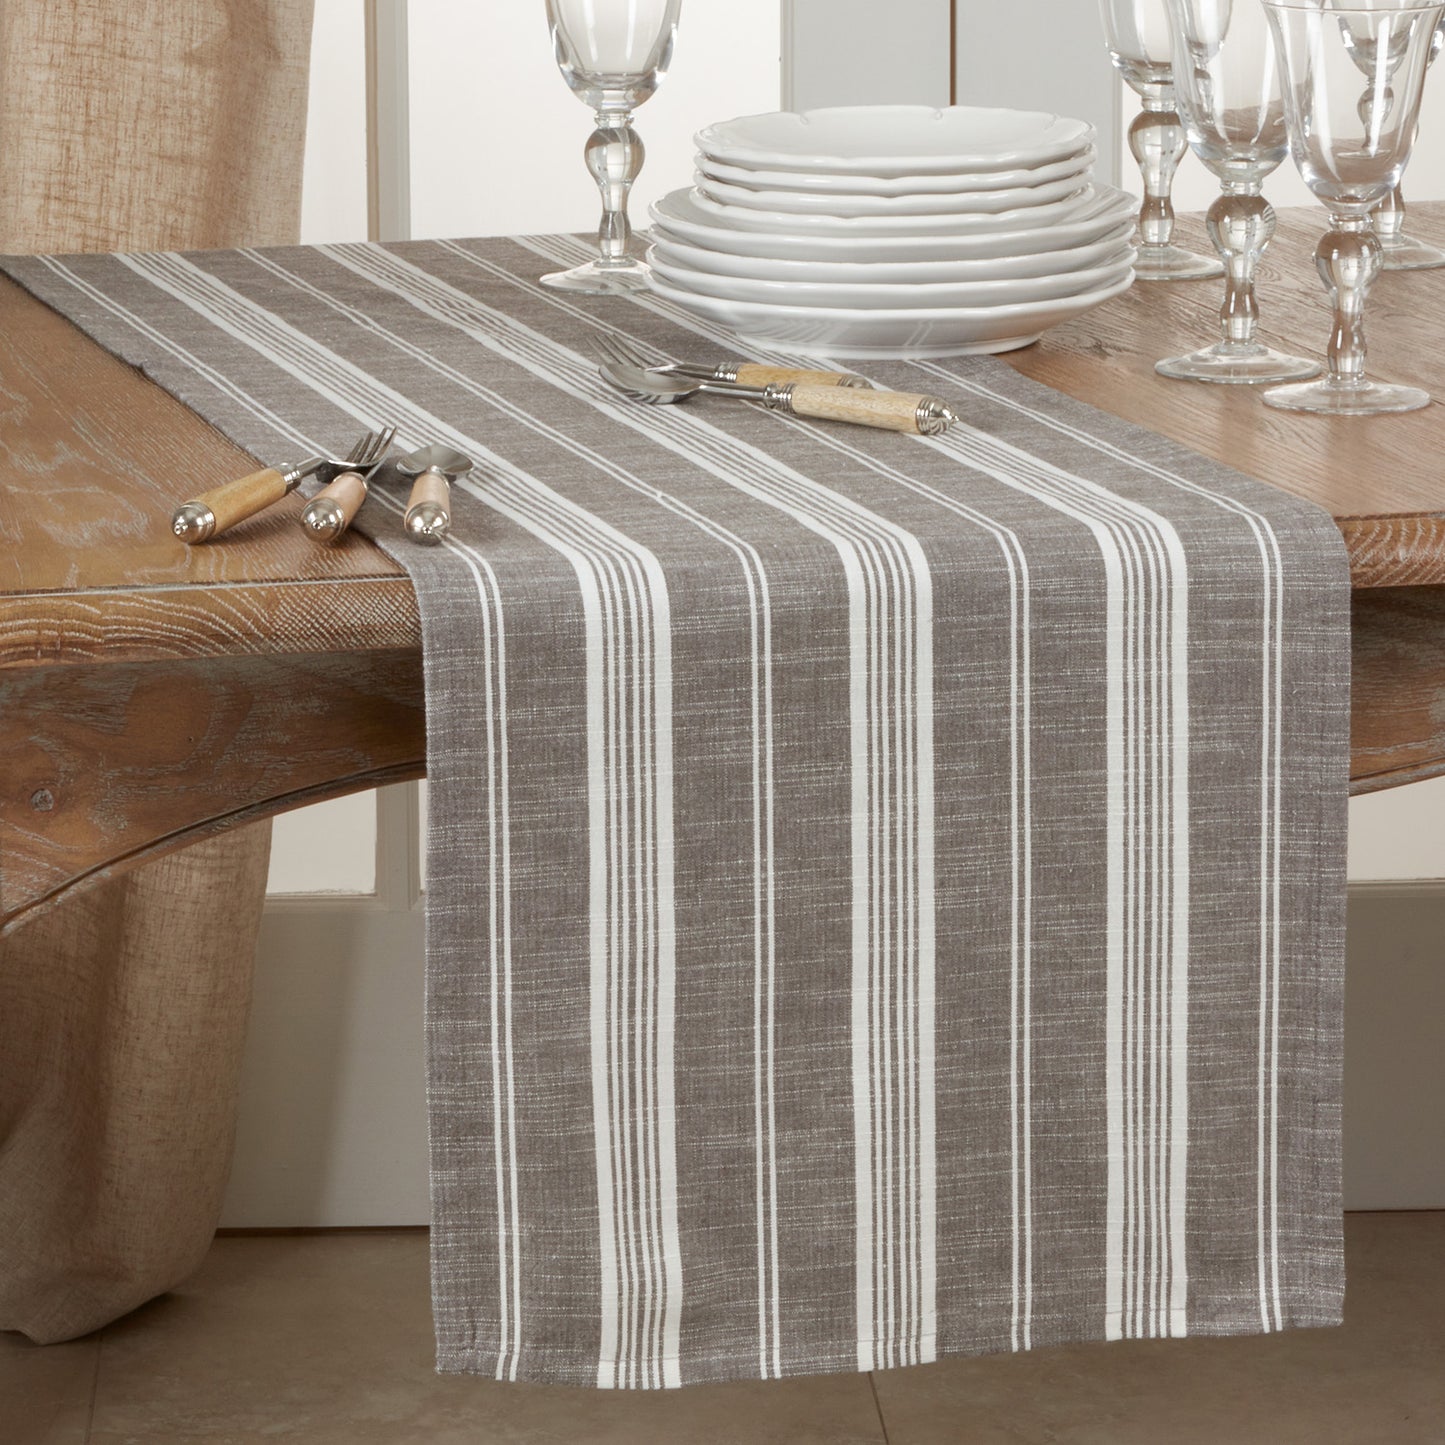 Striped Table Runner Grey